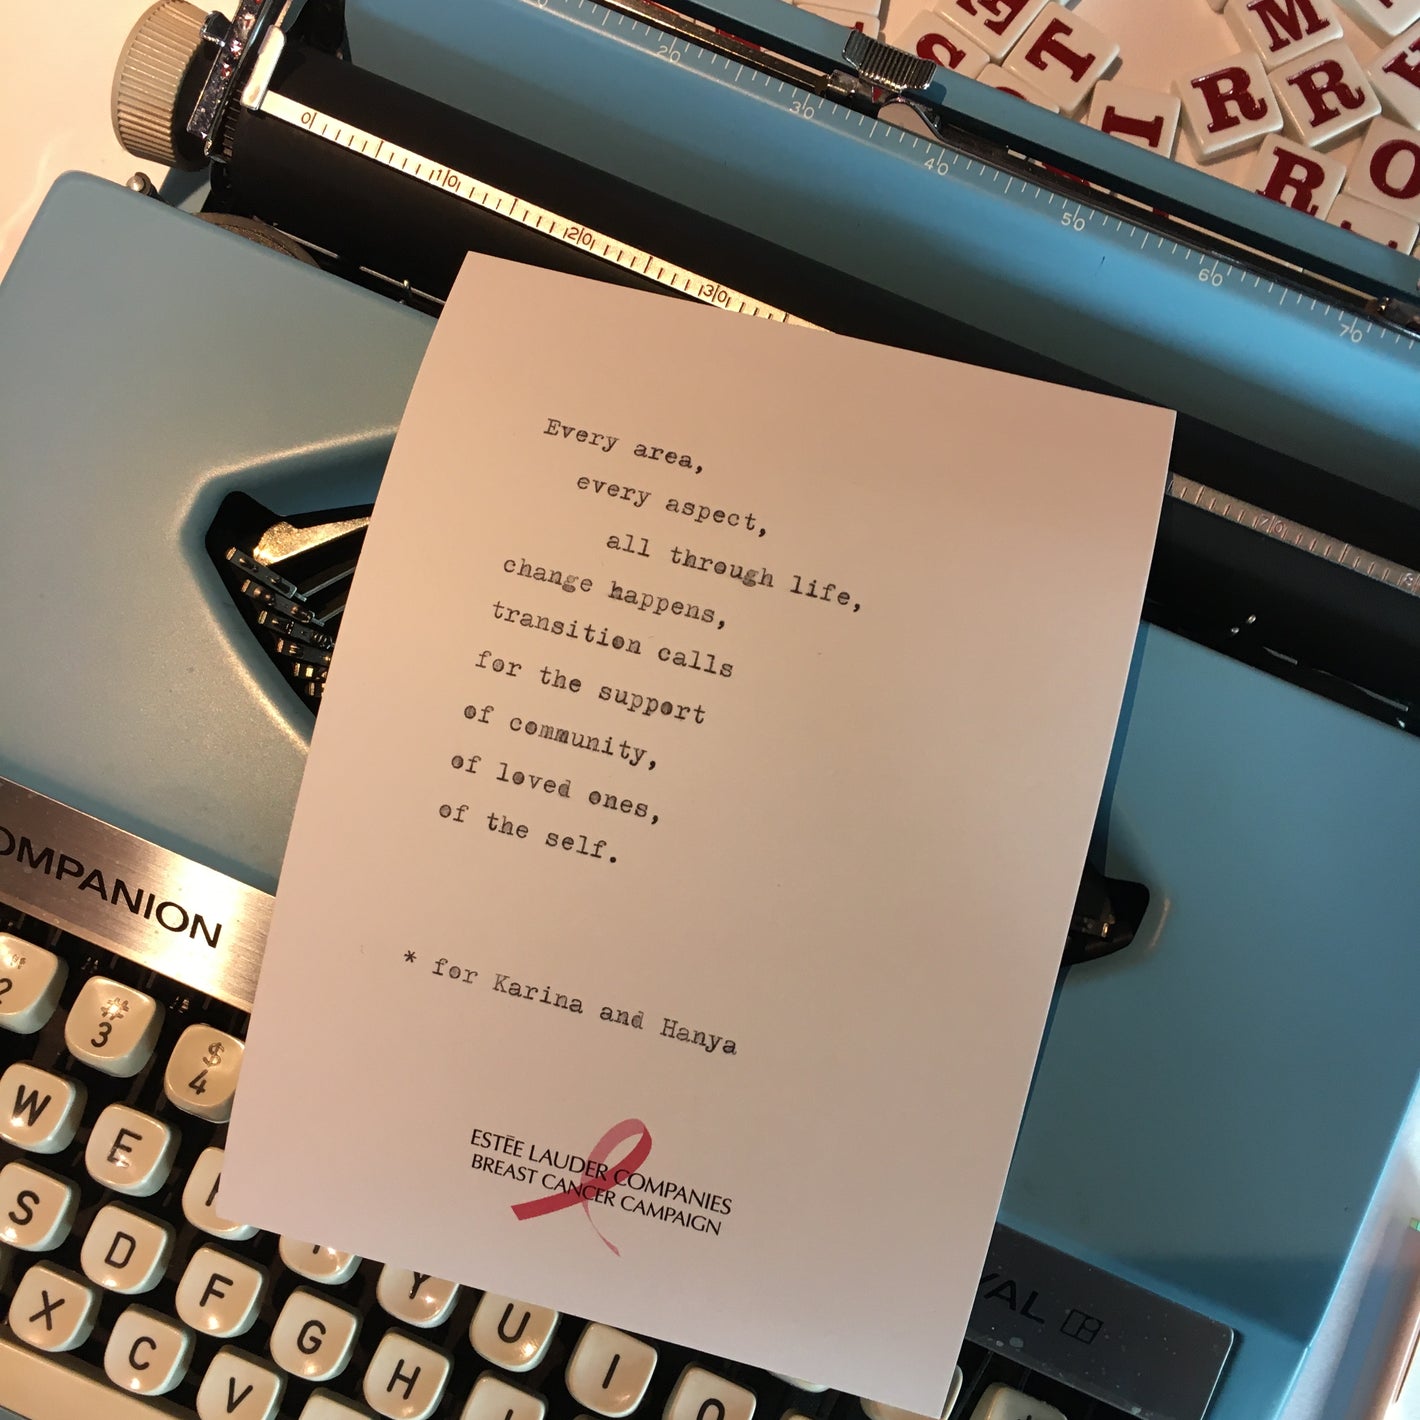 Estee Lauder Cancer Campaign Toronto, Canada, activation poetry typewriter pink ribbon